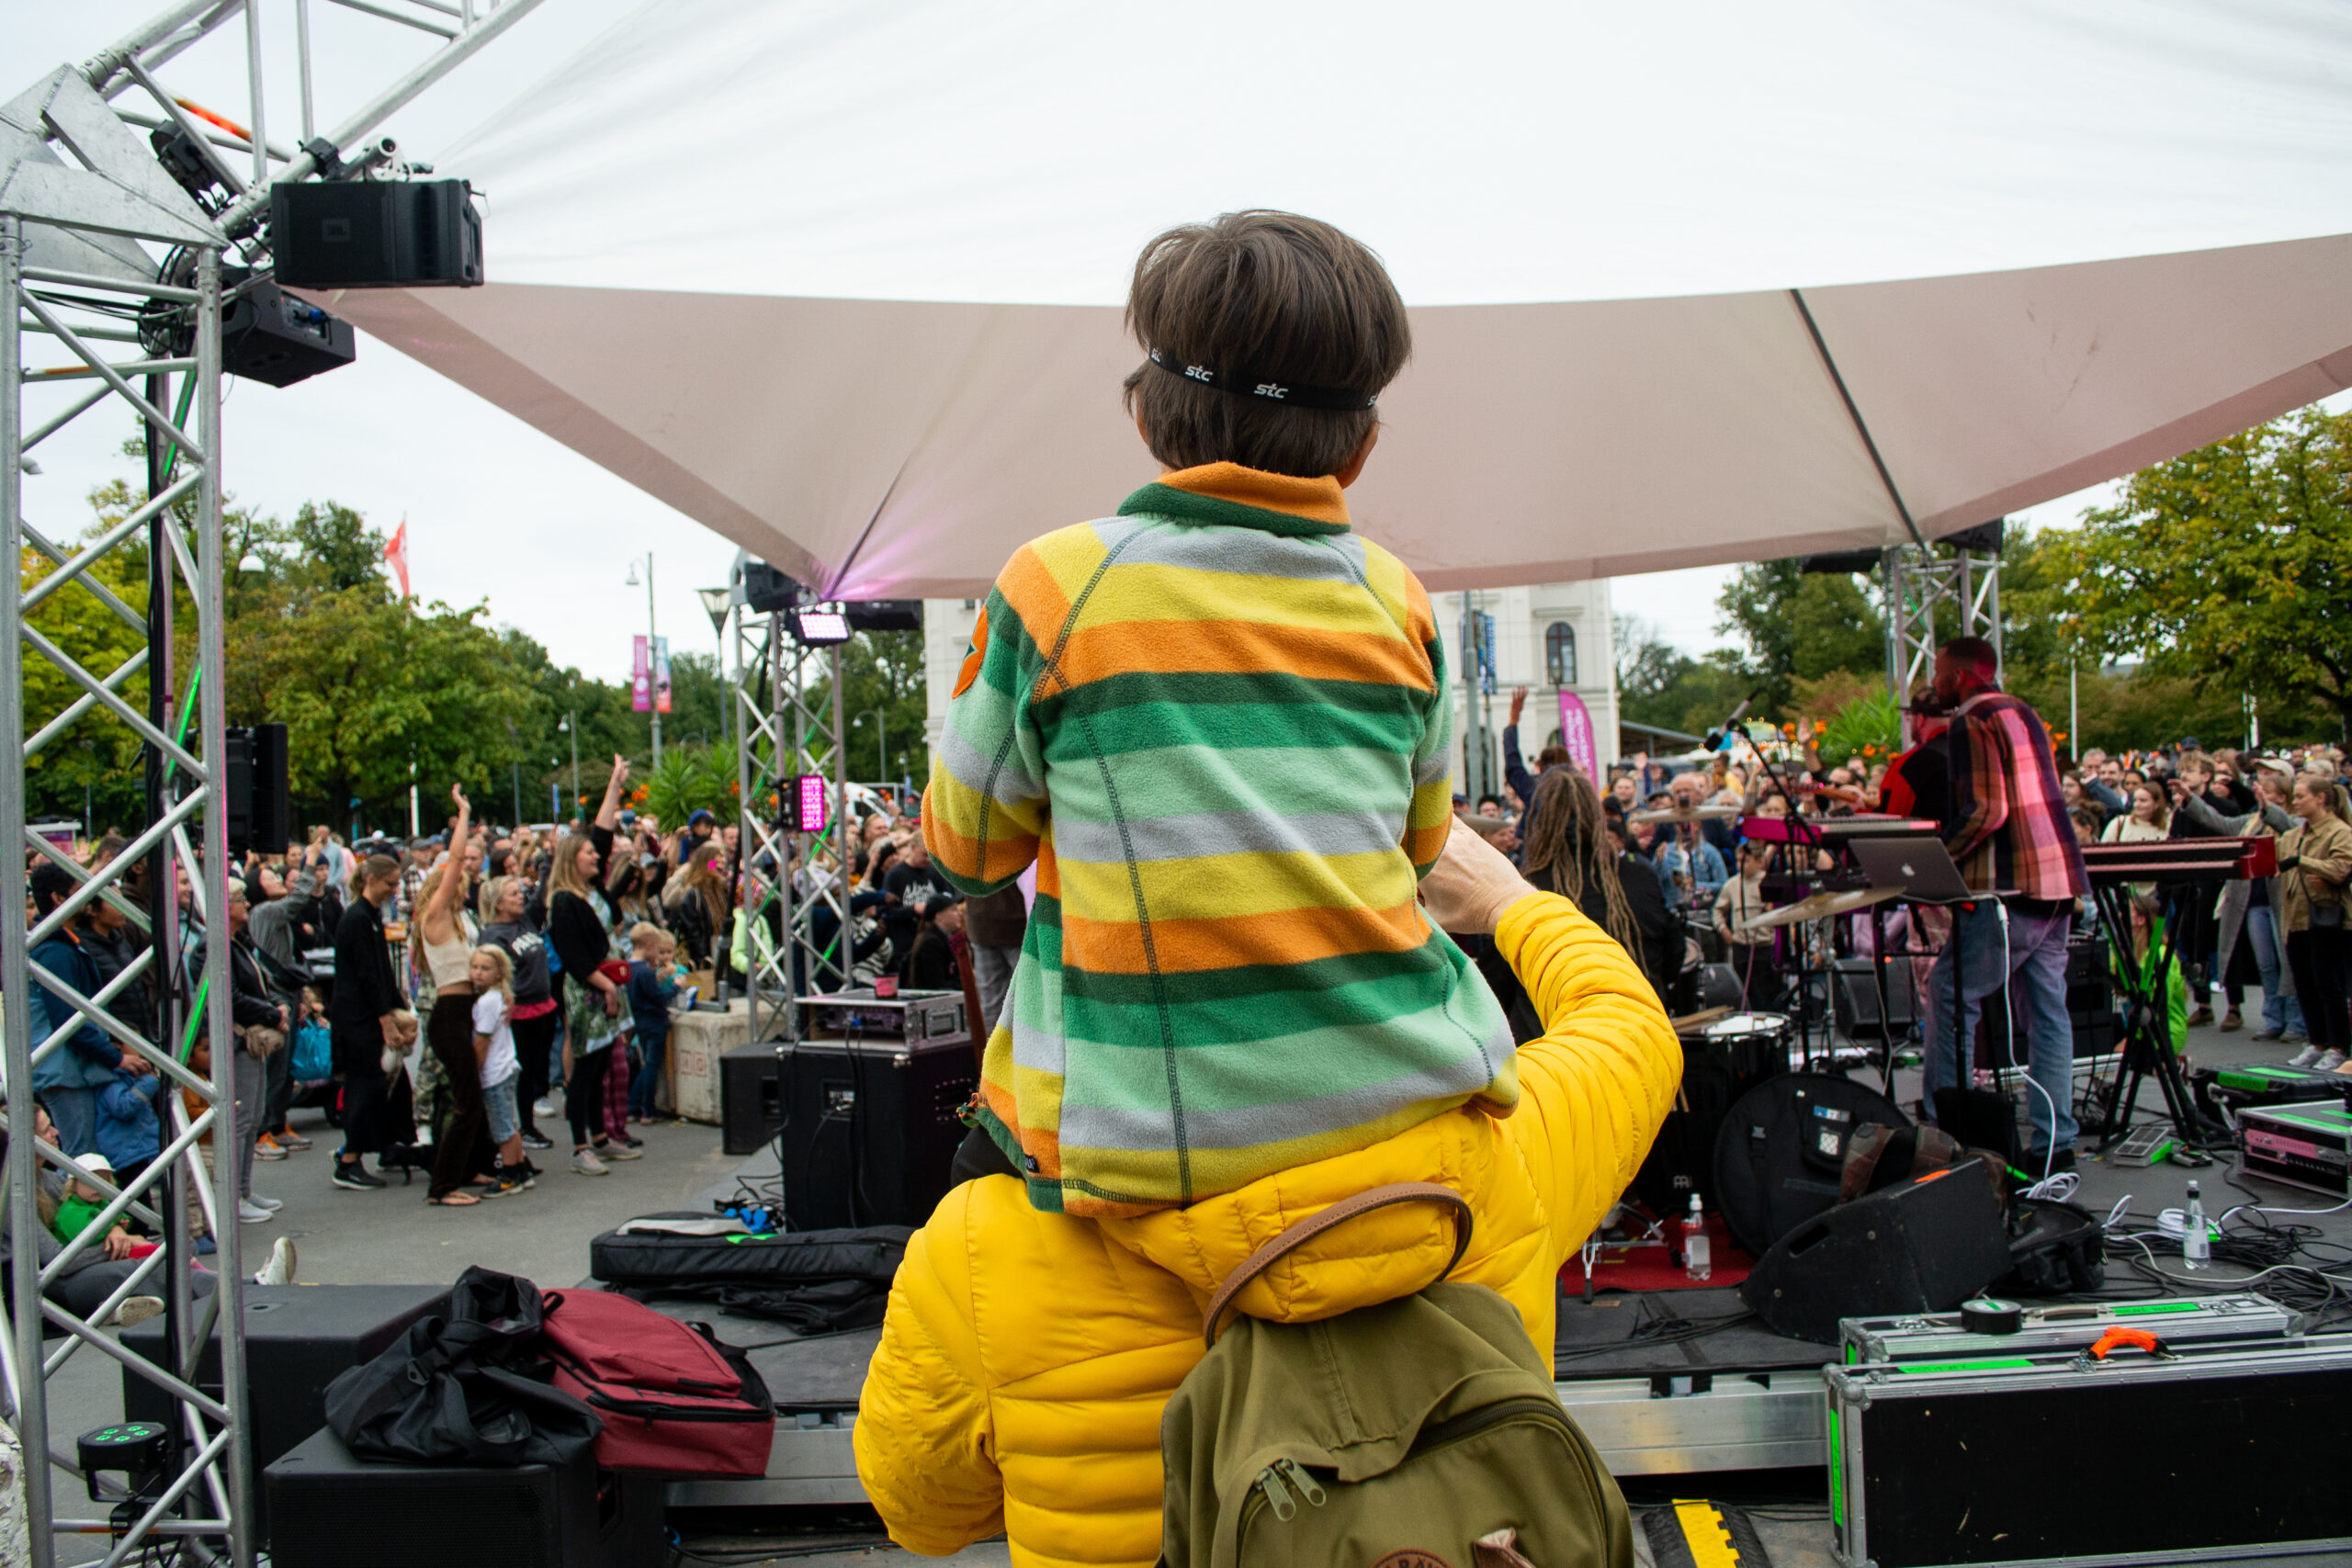 A child sits on an adult's shoulders and watches a concert in Bältespännarparken. Their backs are facing the camera. The child is wearing a shirt with yellow, green and white stripes and his hair is dark brown. The adult wears a yellow sweater and moss green backpack.